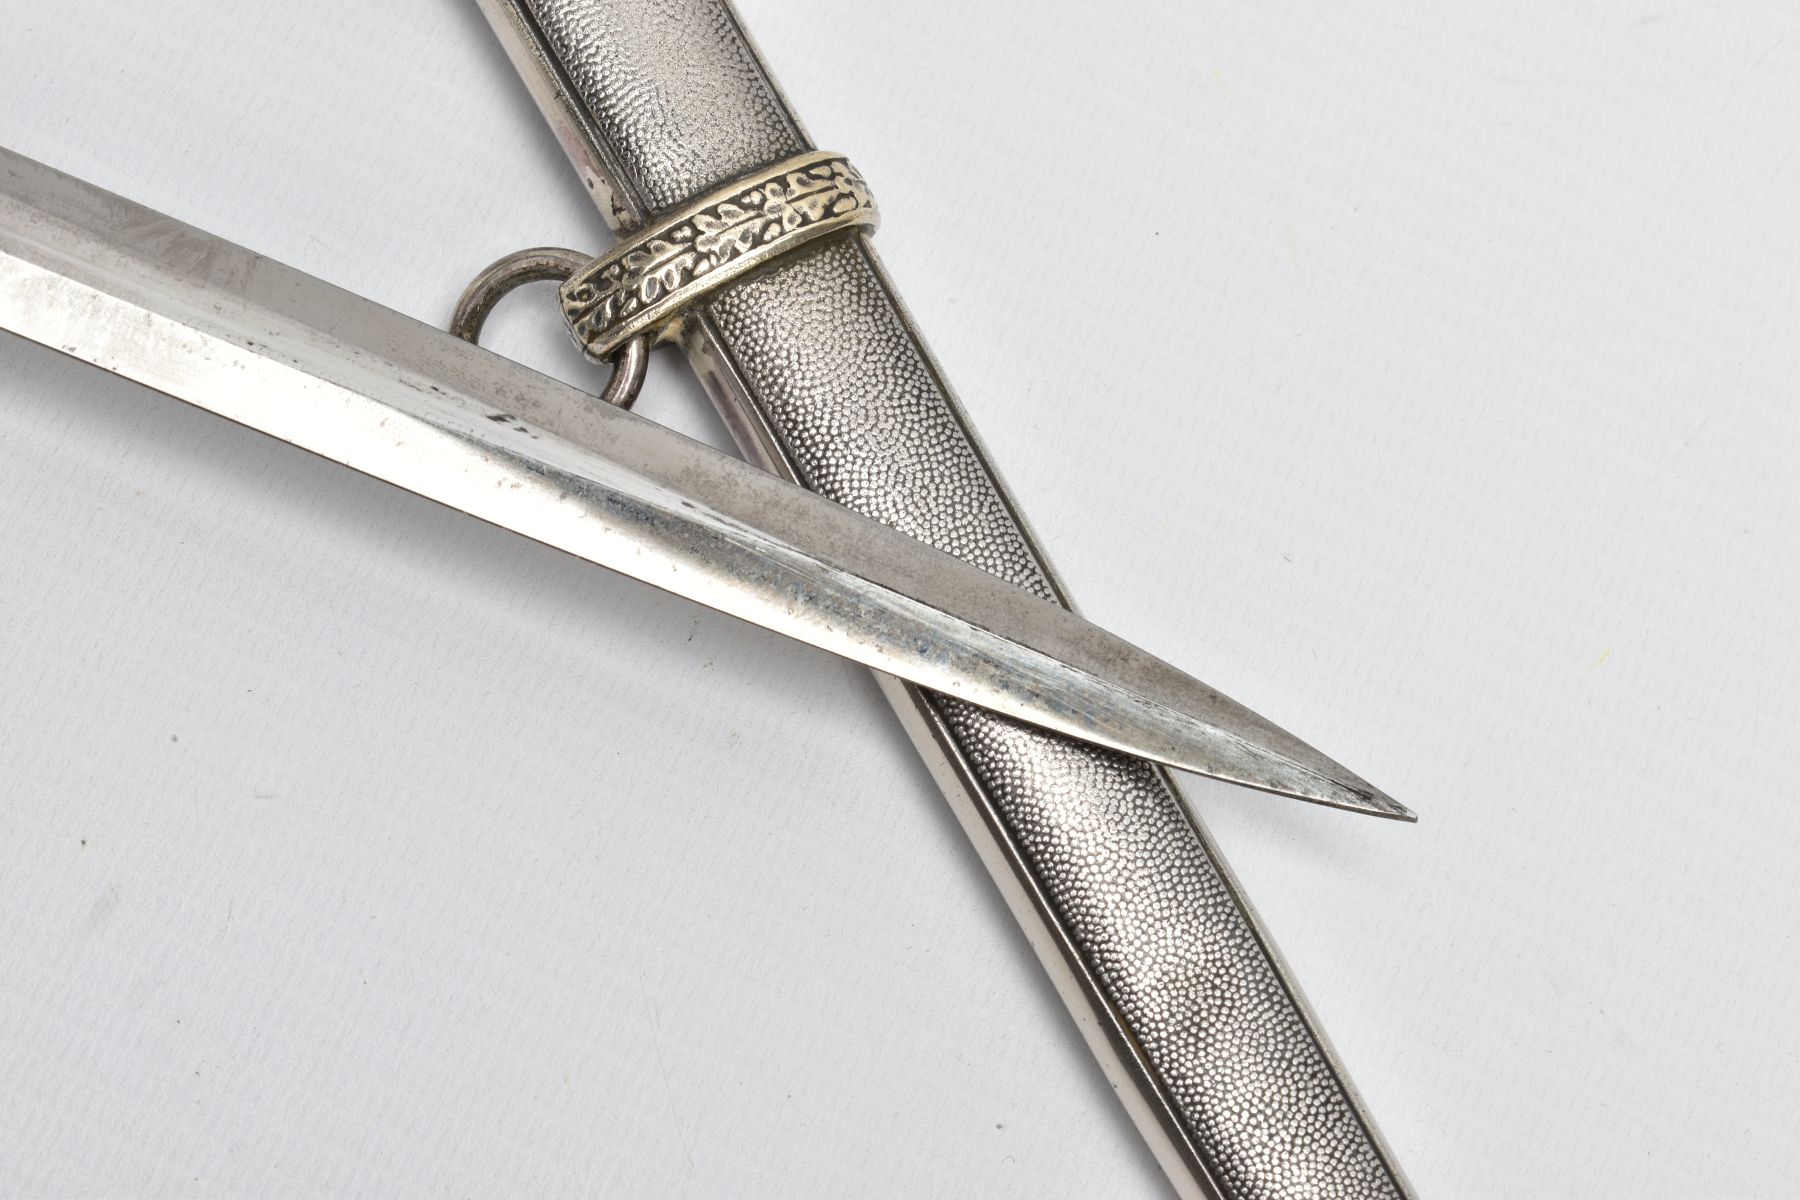 GERMAN 3RD REICH ARMY HEER DRESS DAGGER, WWII period by Carl Eickhorn, Solingen, with etched maker - Image 7 of 7